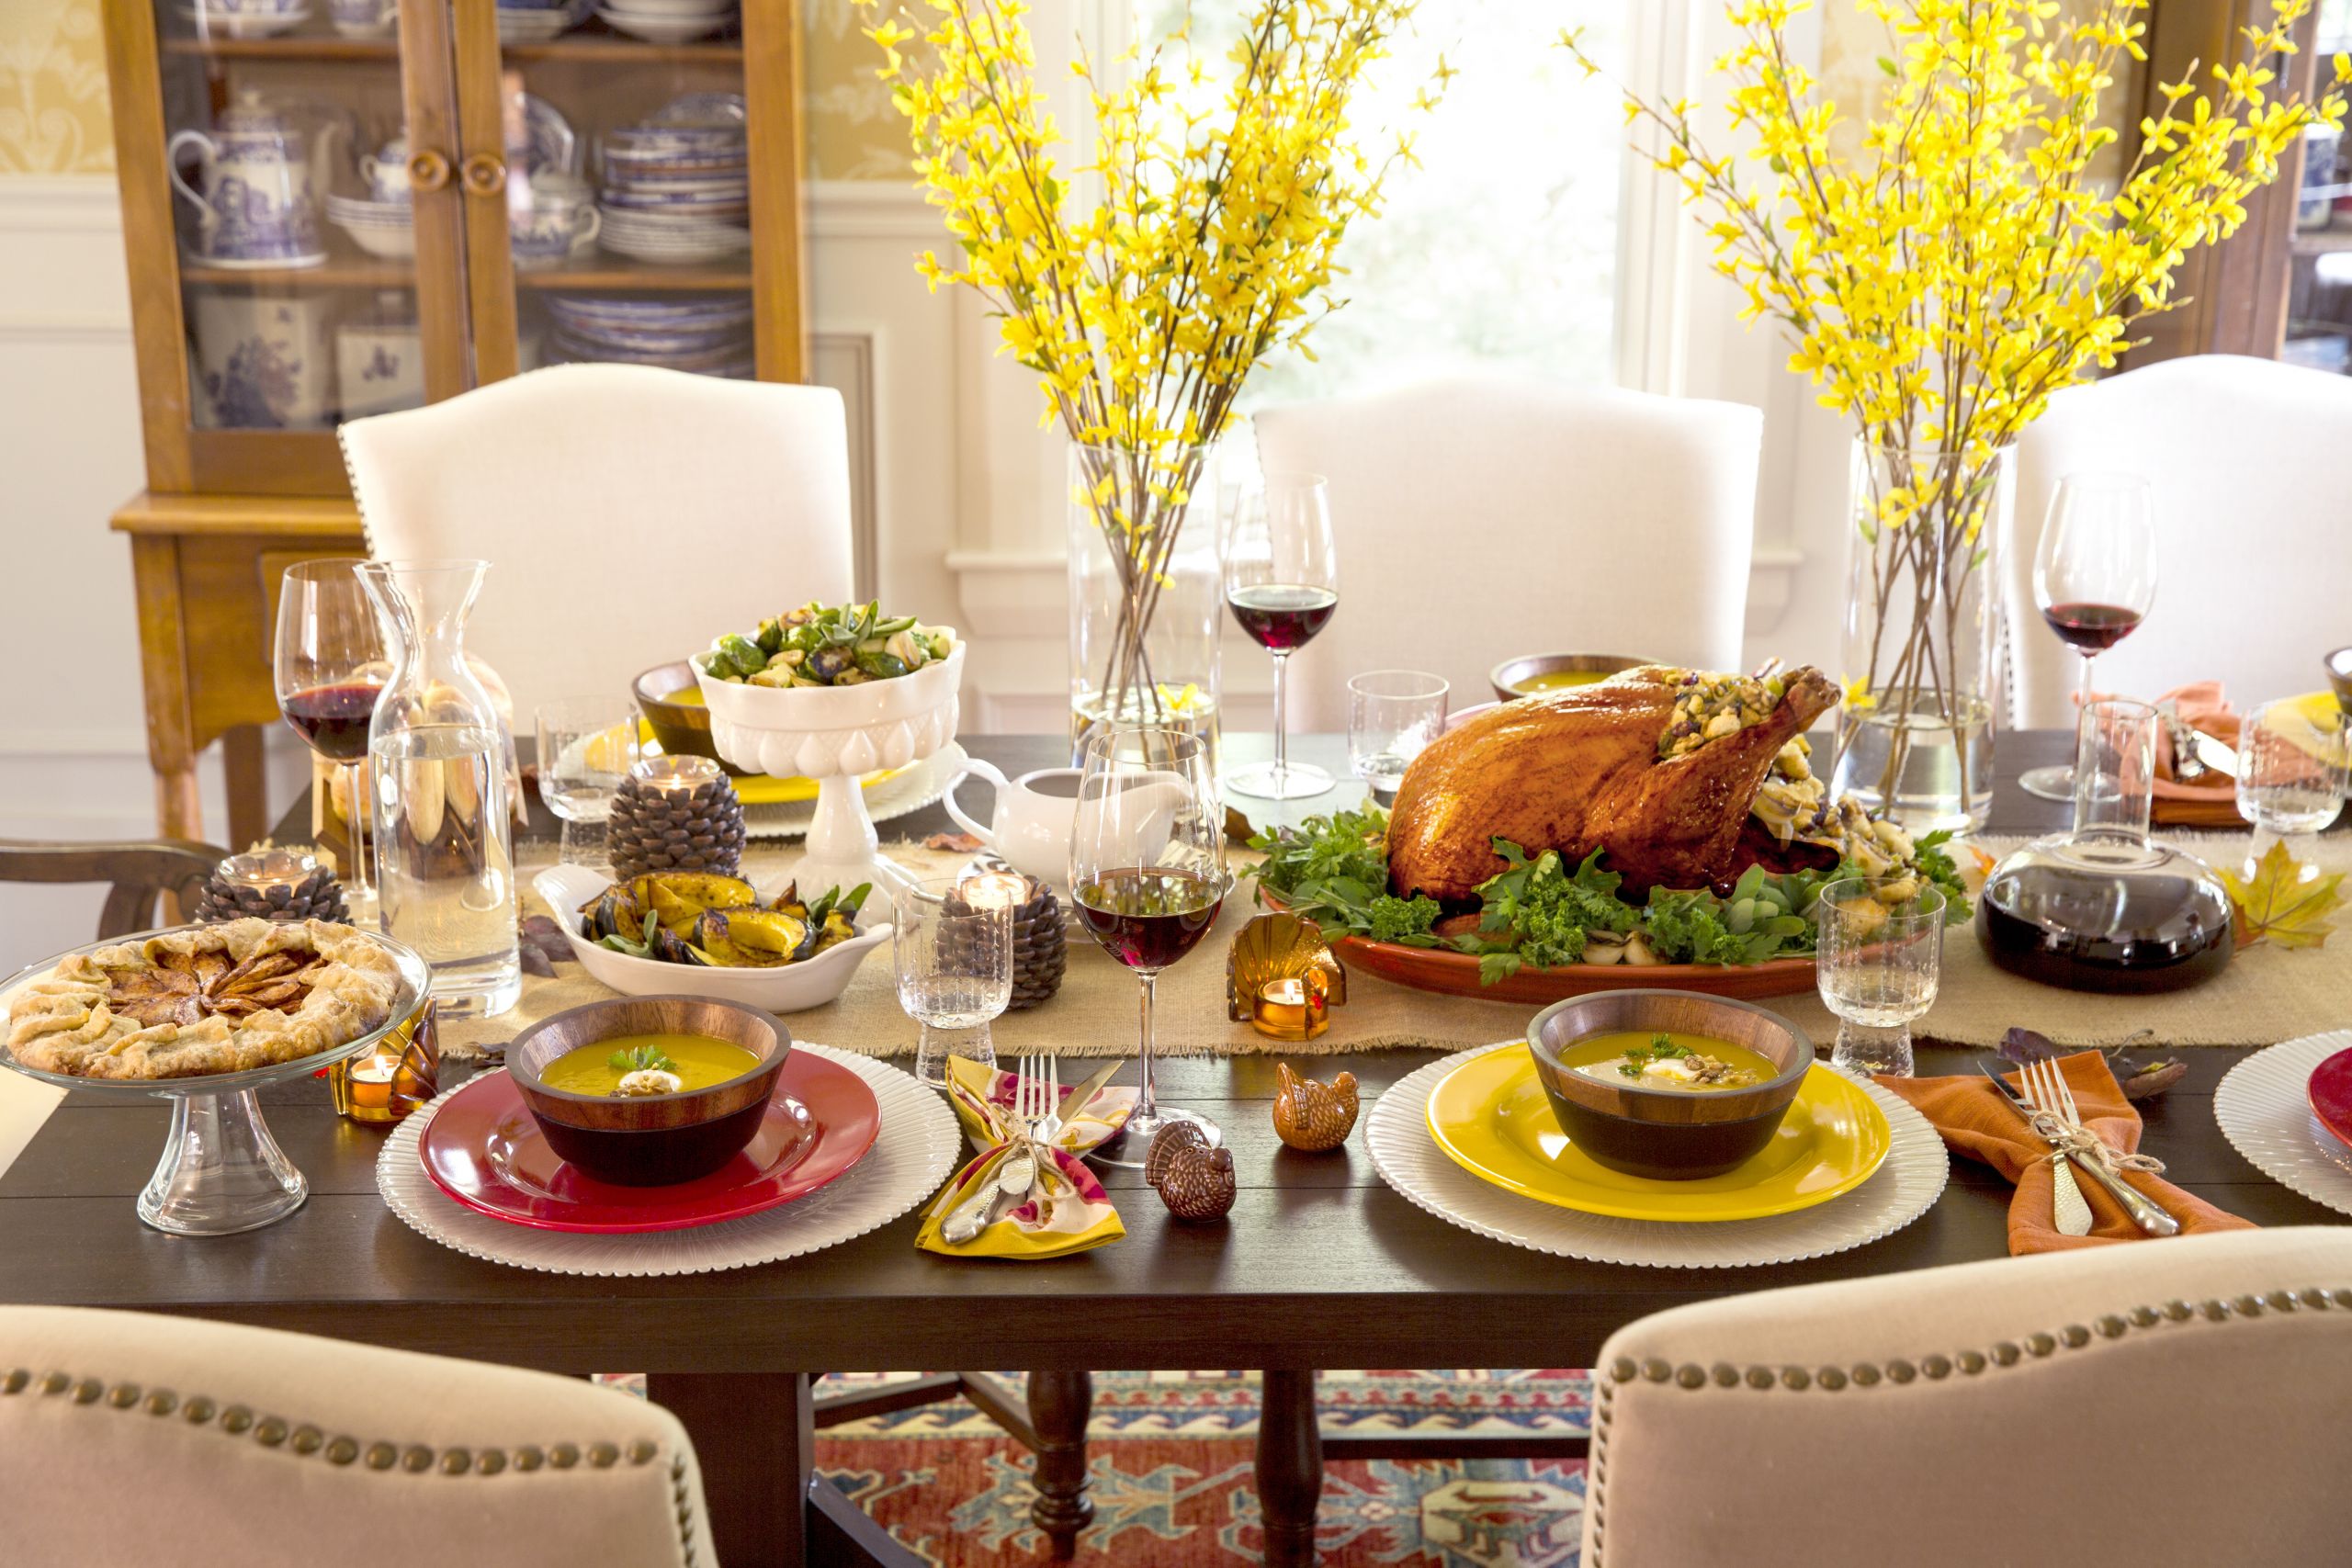 Thanksgiving Dinner Table Decorations
 10 Tips for Decorating and Setting Your Thanksgiving Table